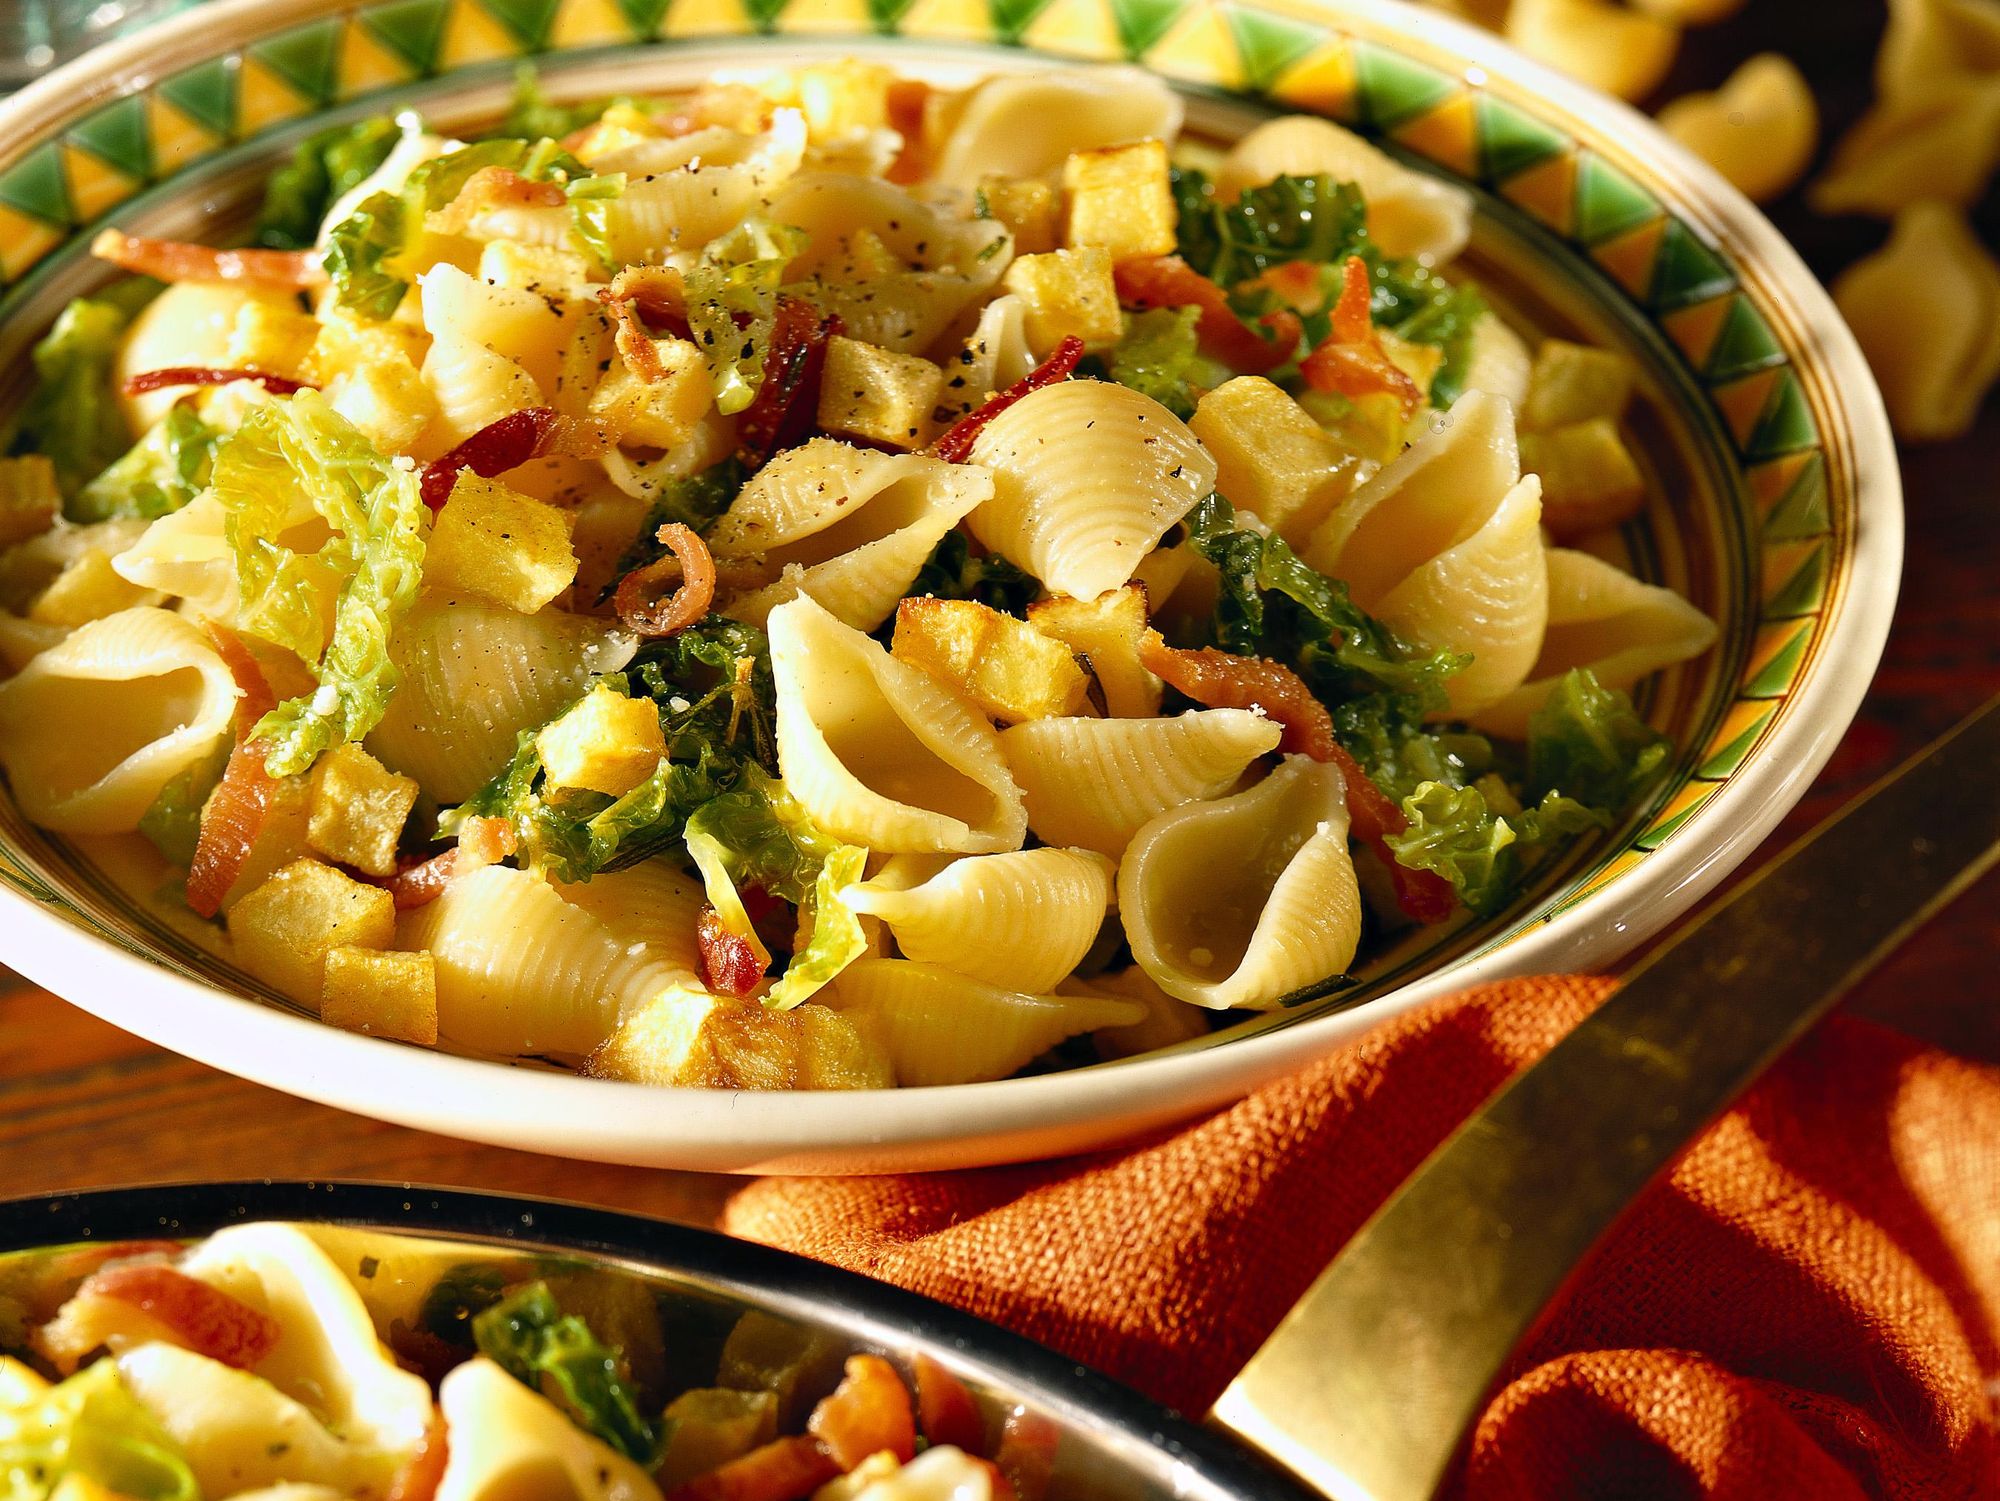 Pasta with cabbage and potatoes